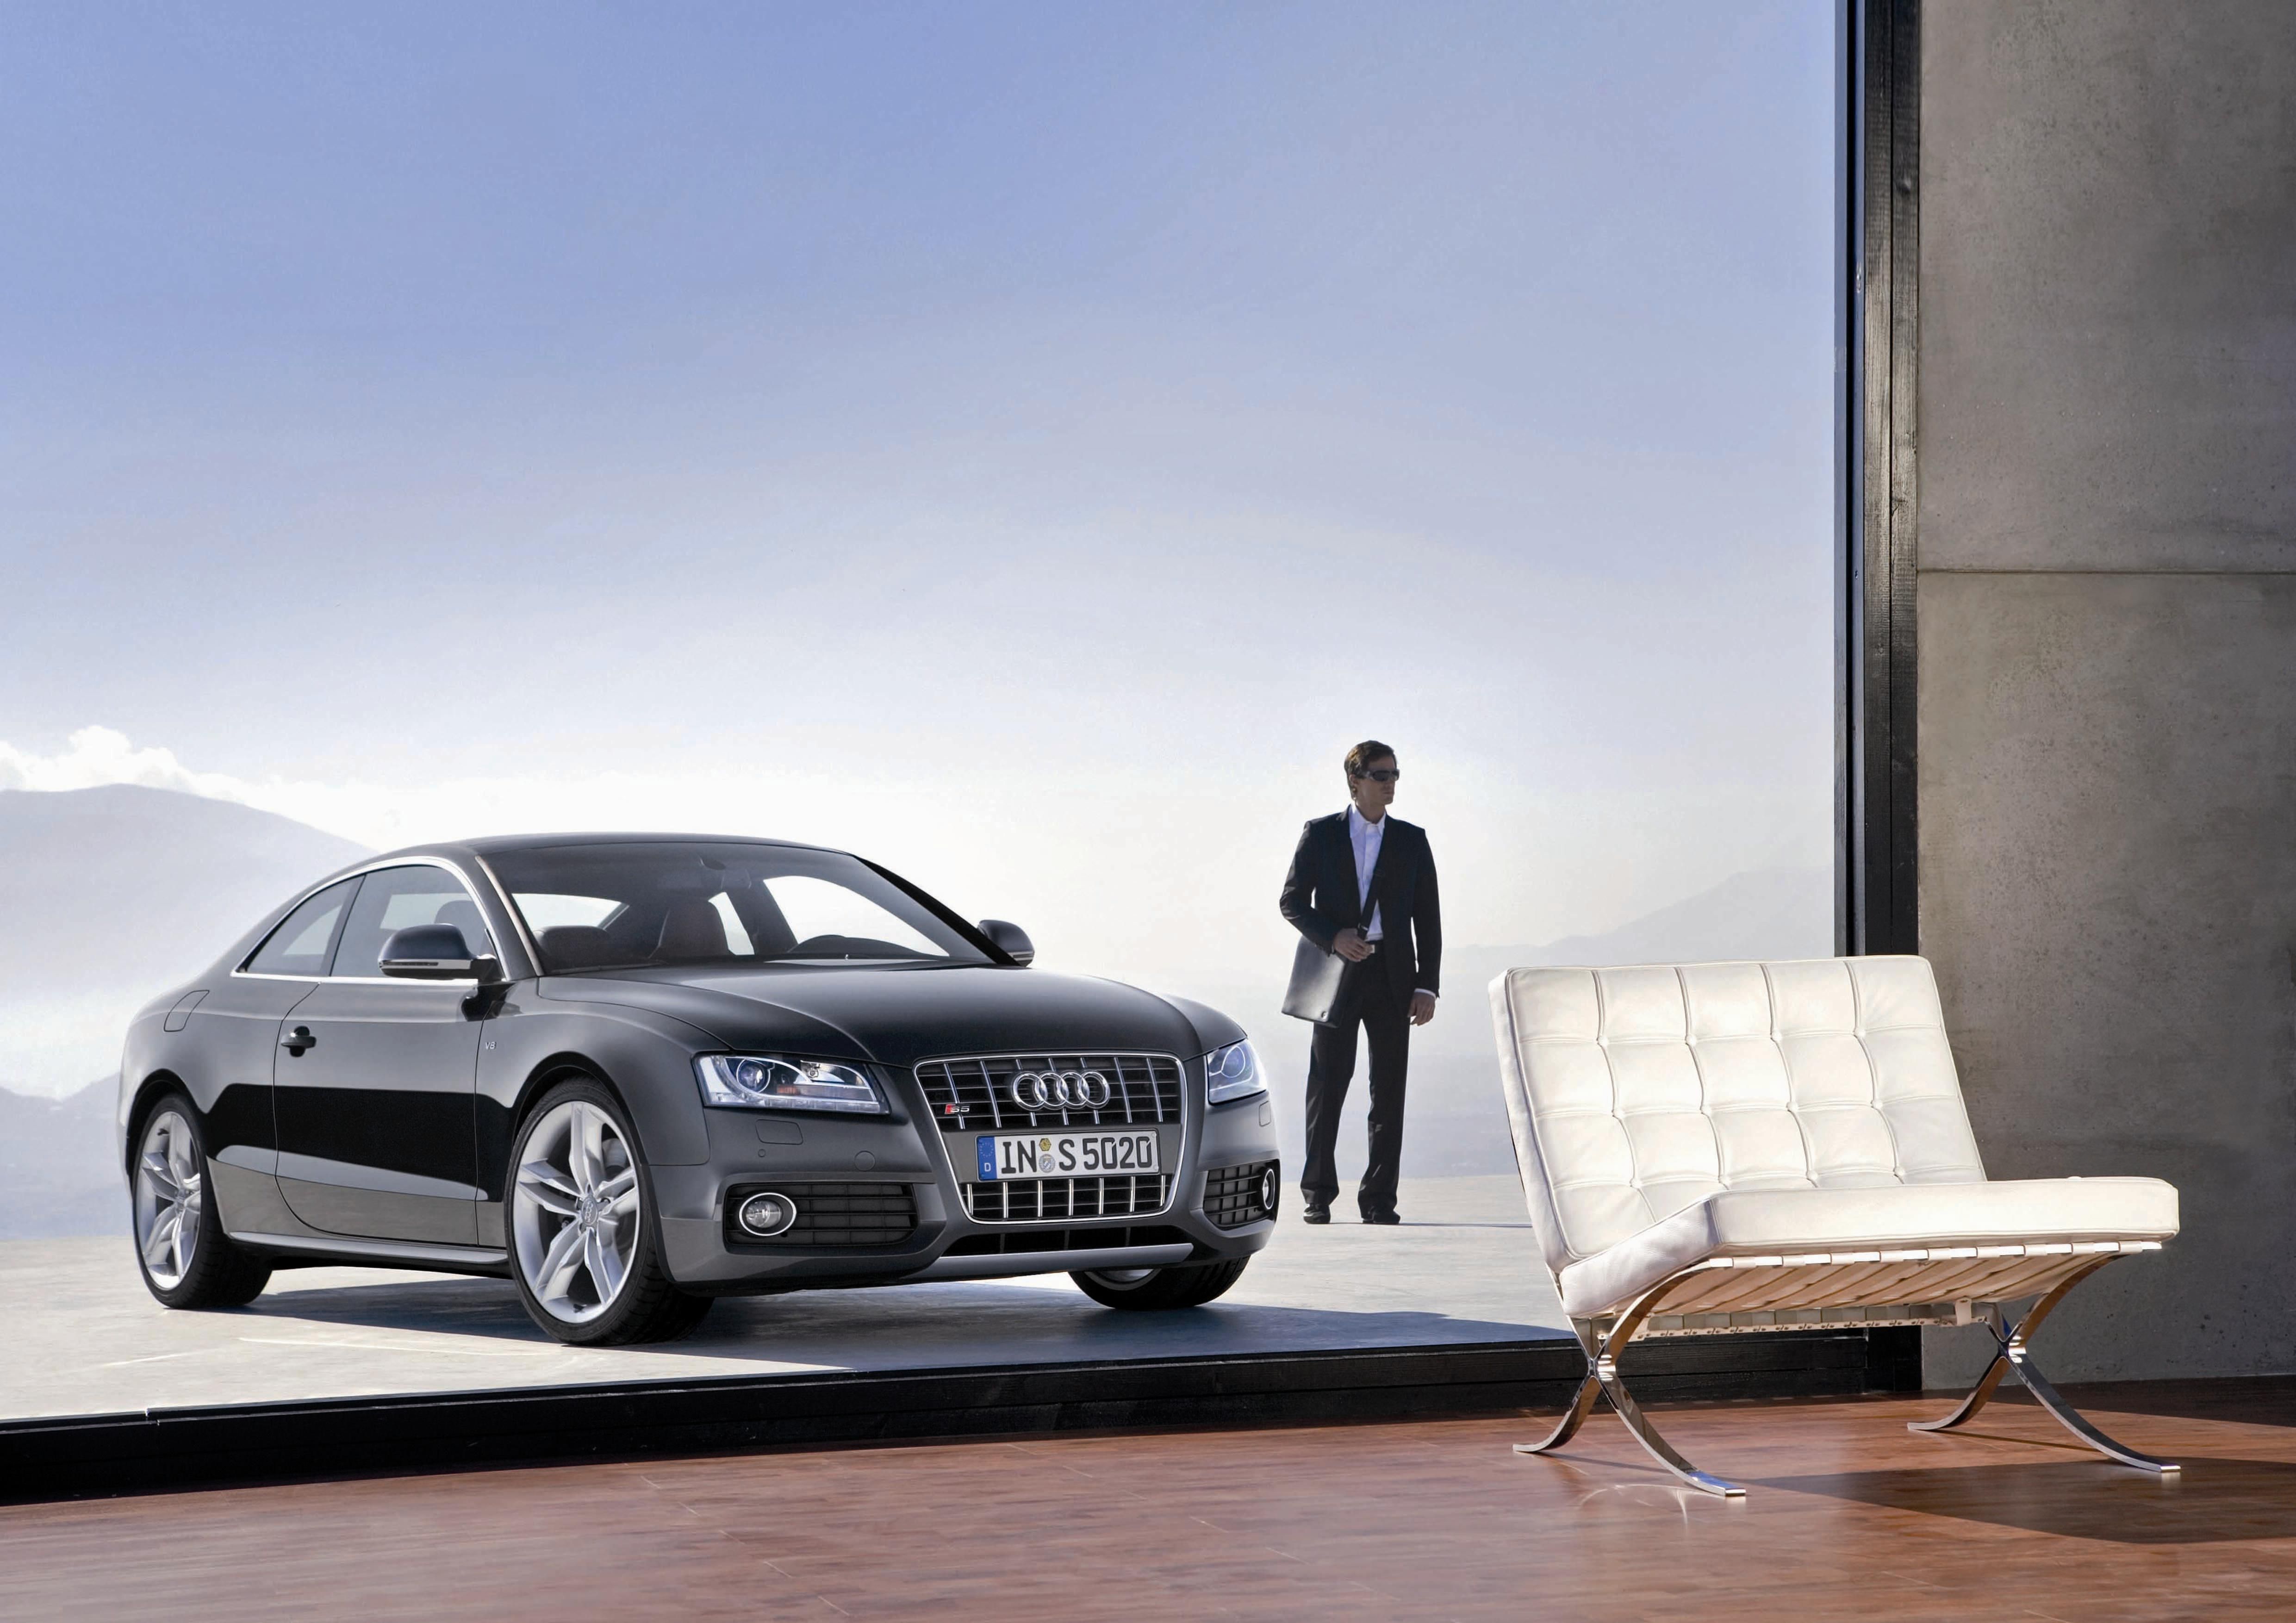 2008 Audi S5 Coupe - official